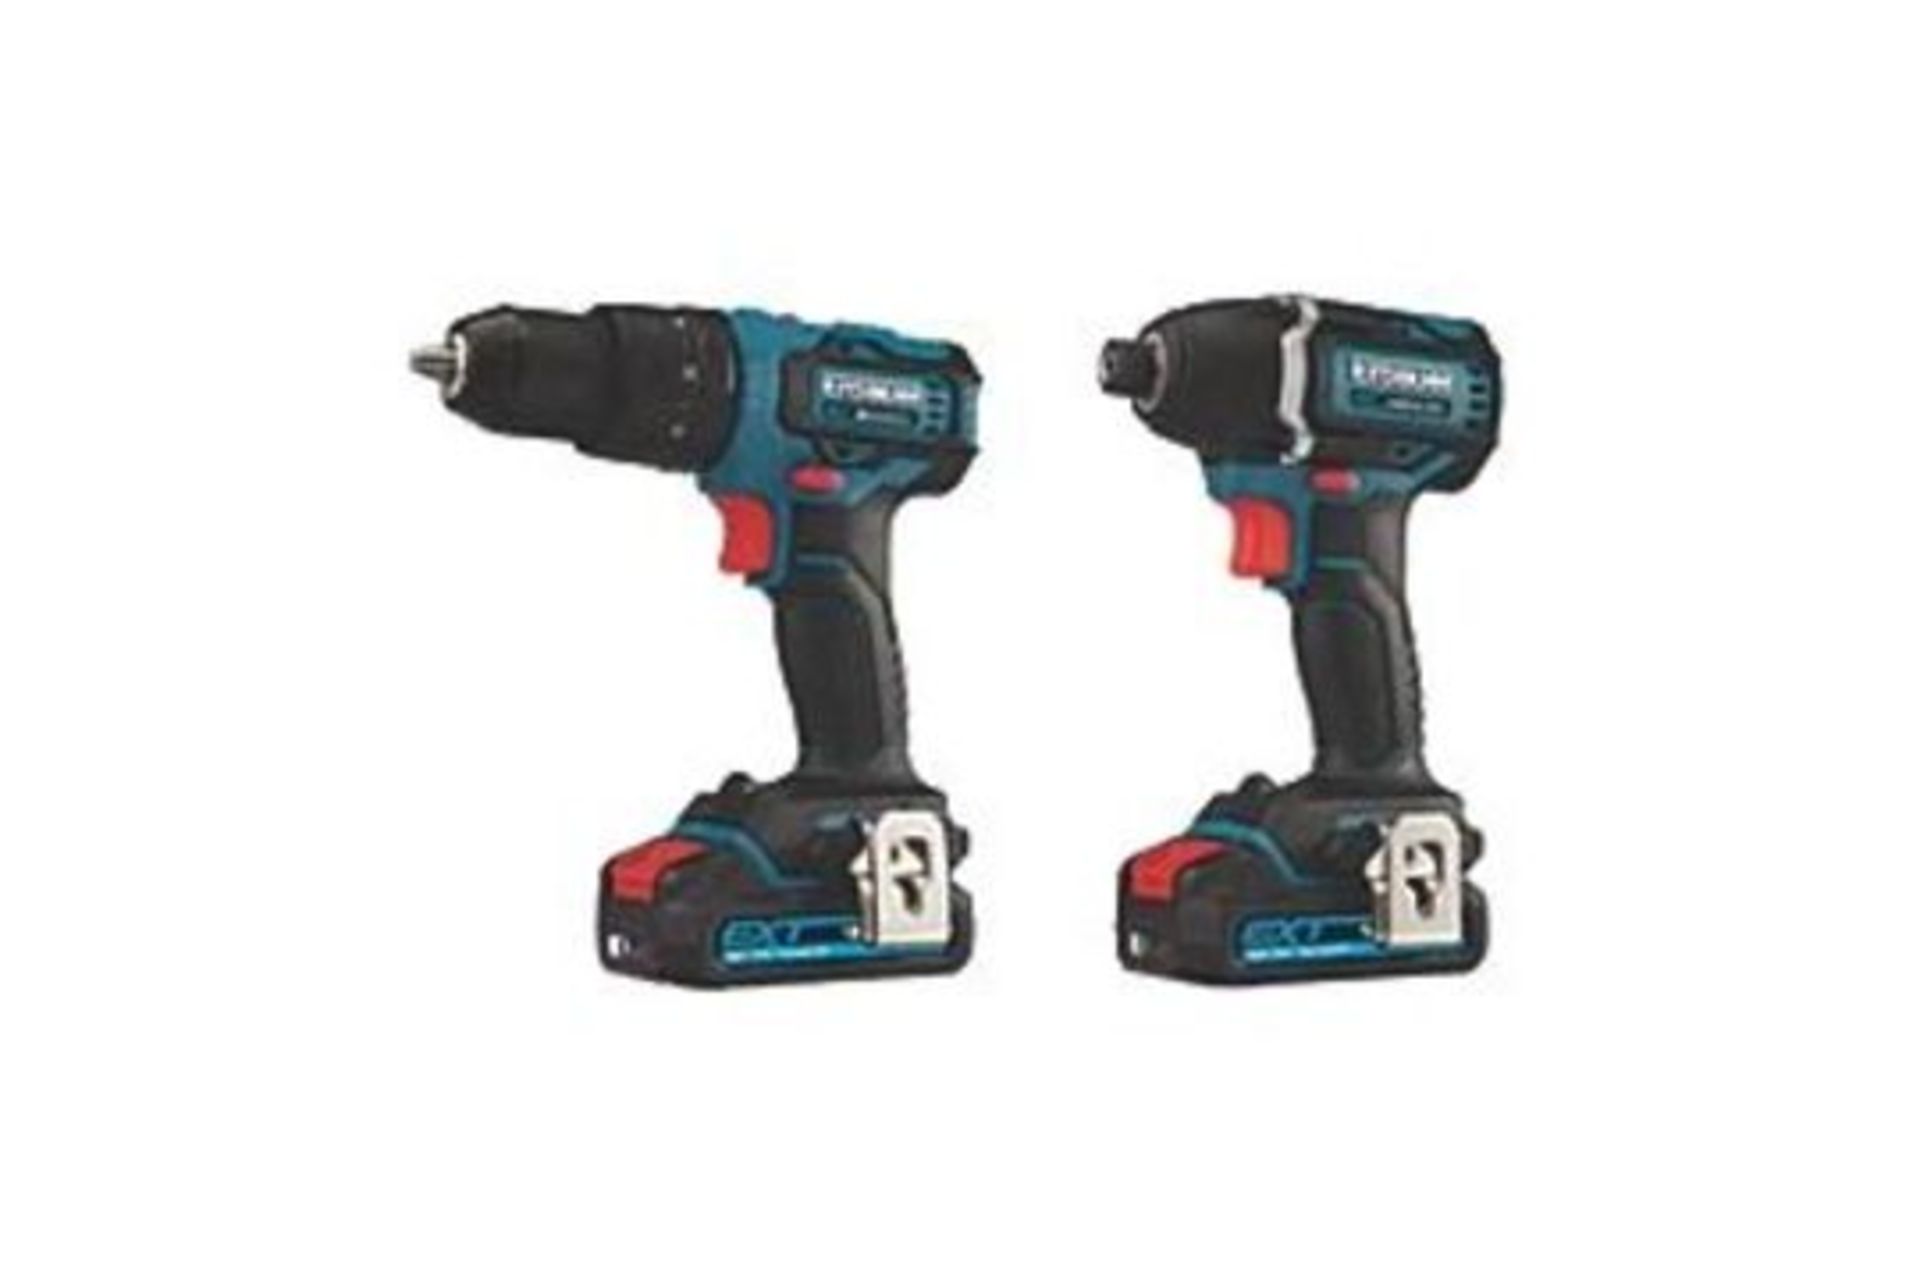 ERBAUER 18V 2 X 2.0AH LI-ION EXT BRUSHLESS CORDLESS TWIN PACK. - R14.9. 3-in-1 multi-function